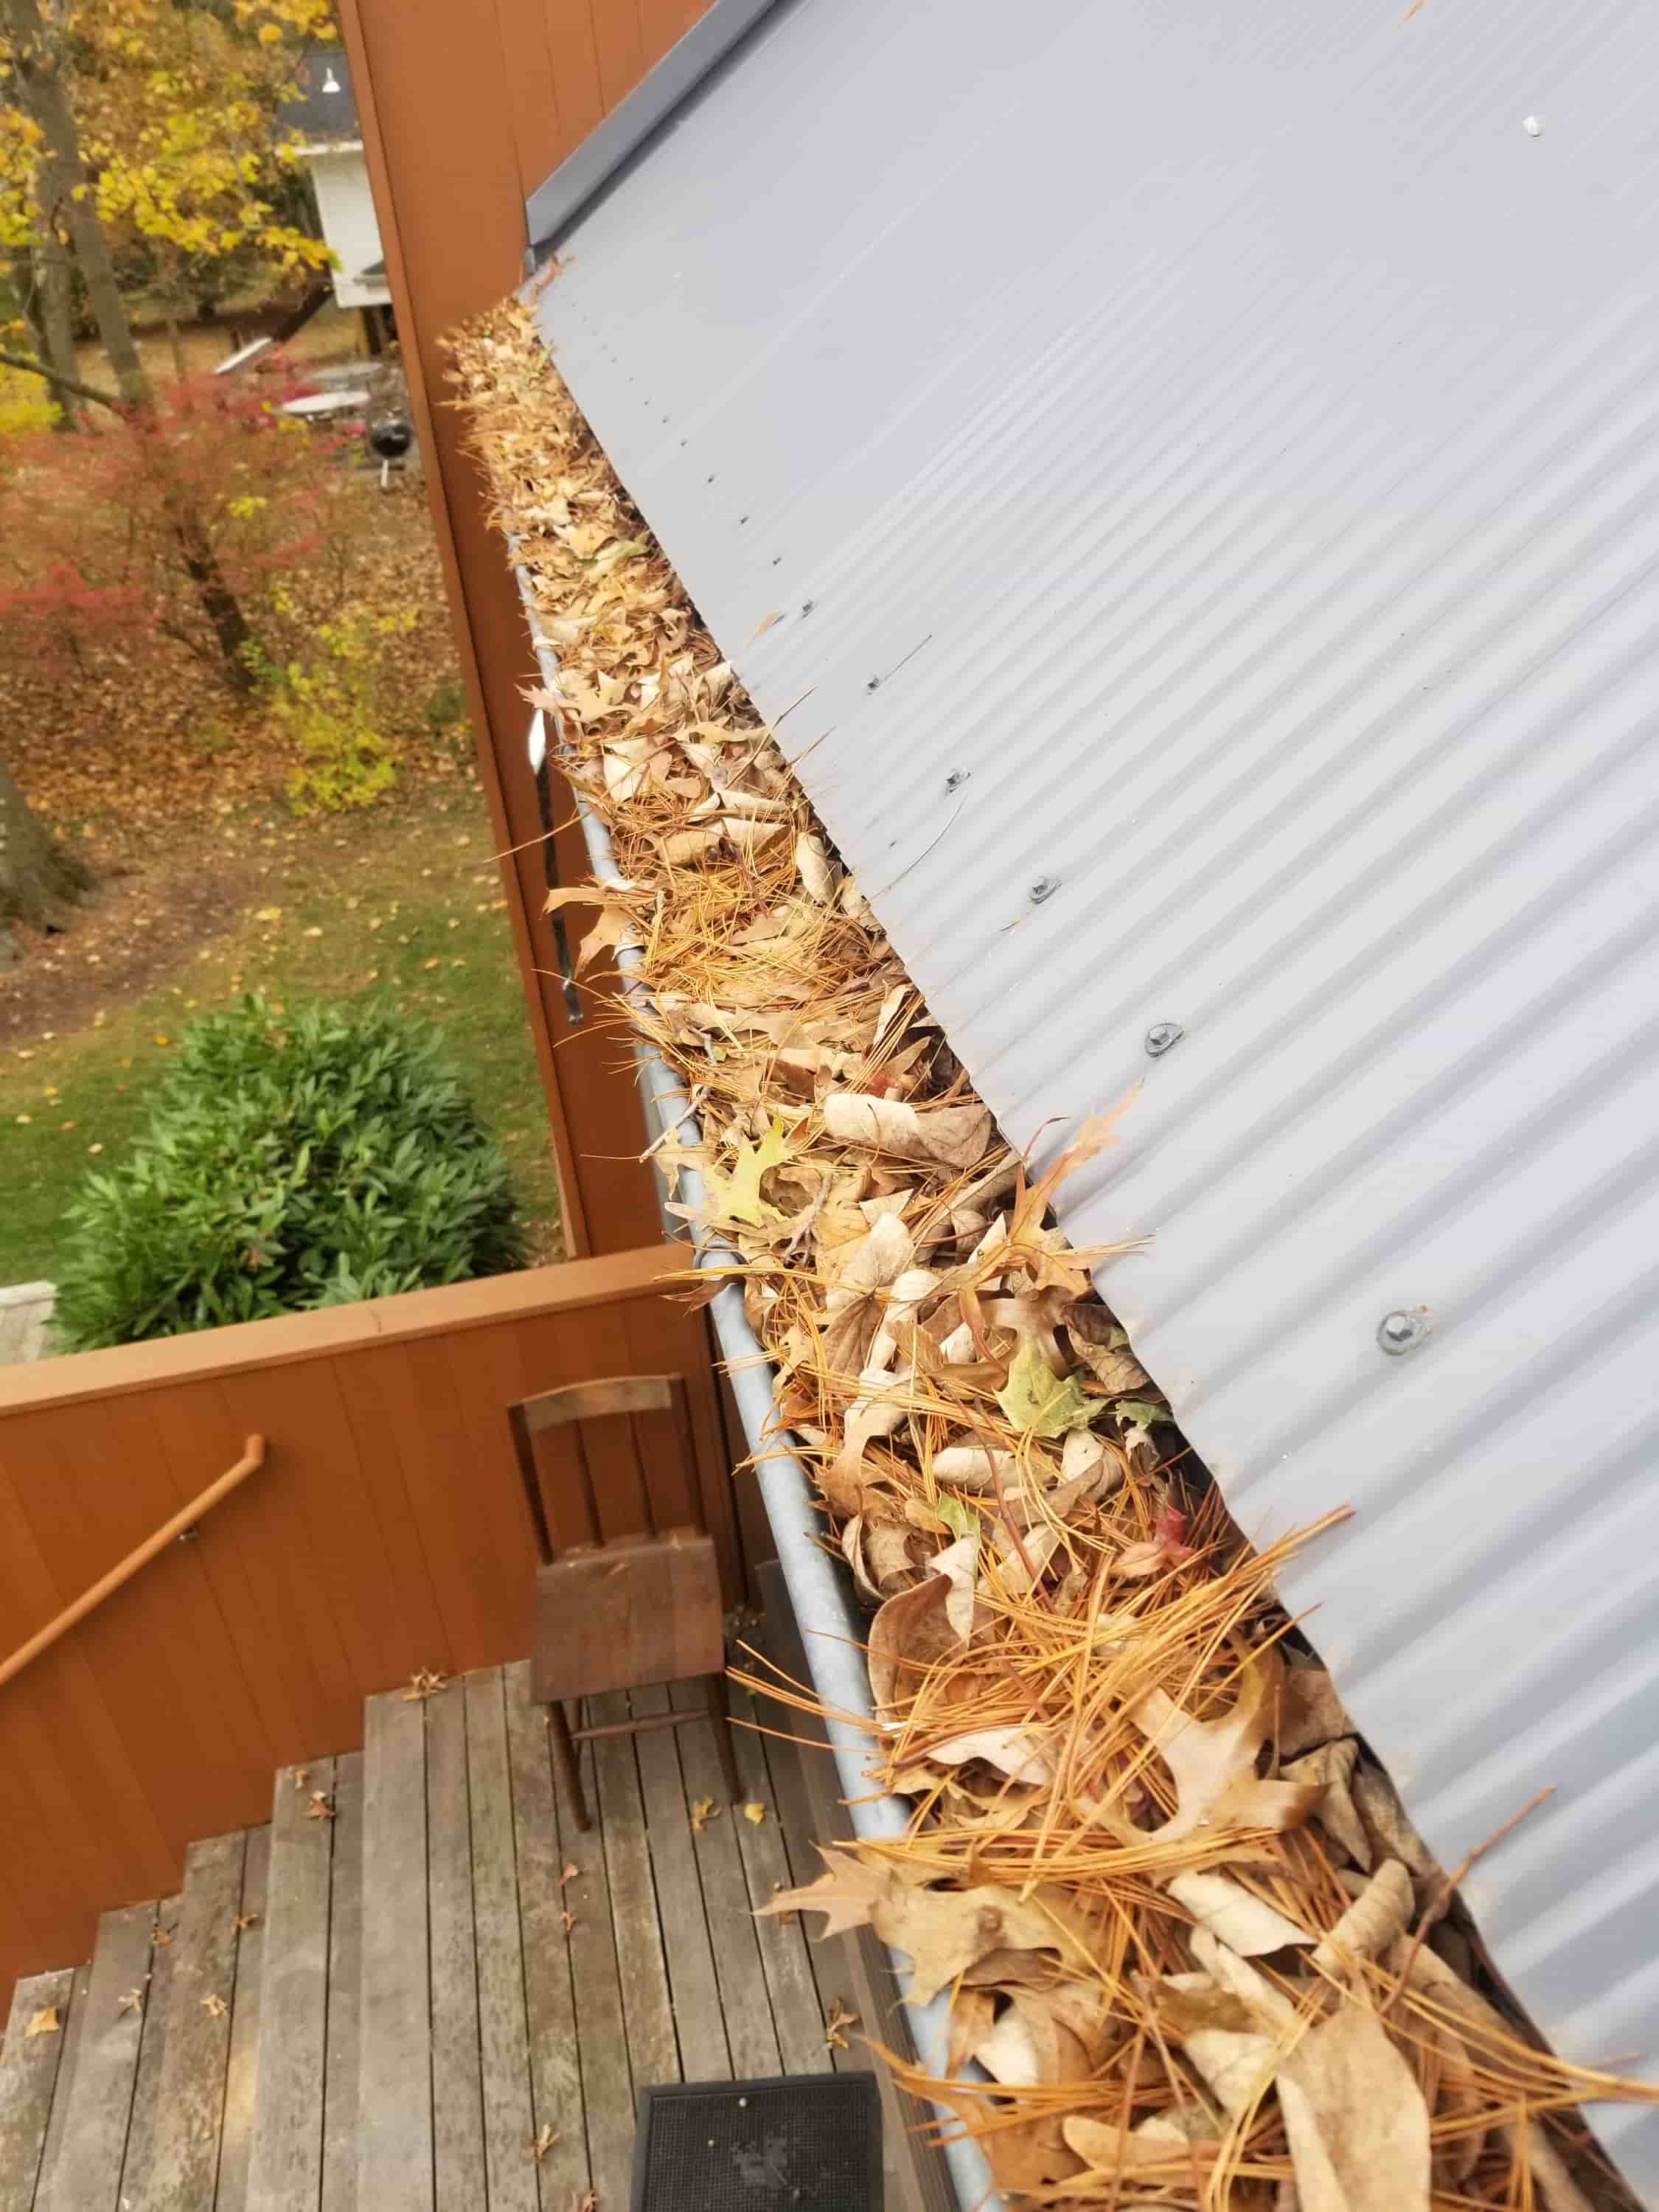 gutter clean out